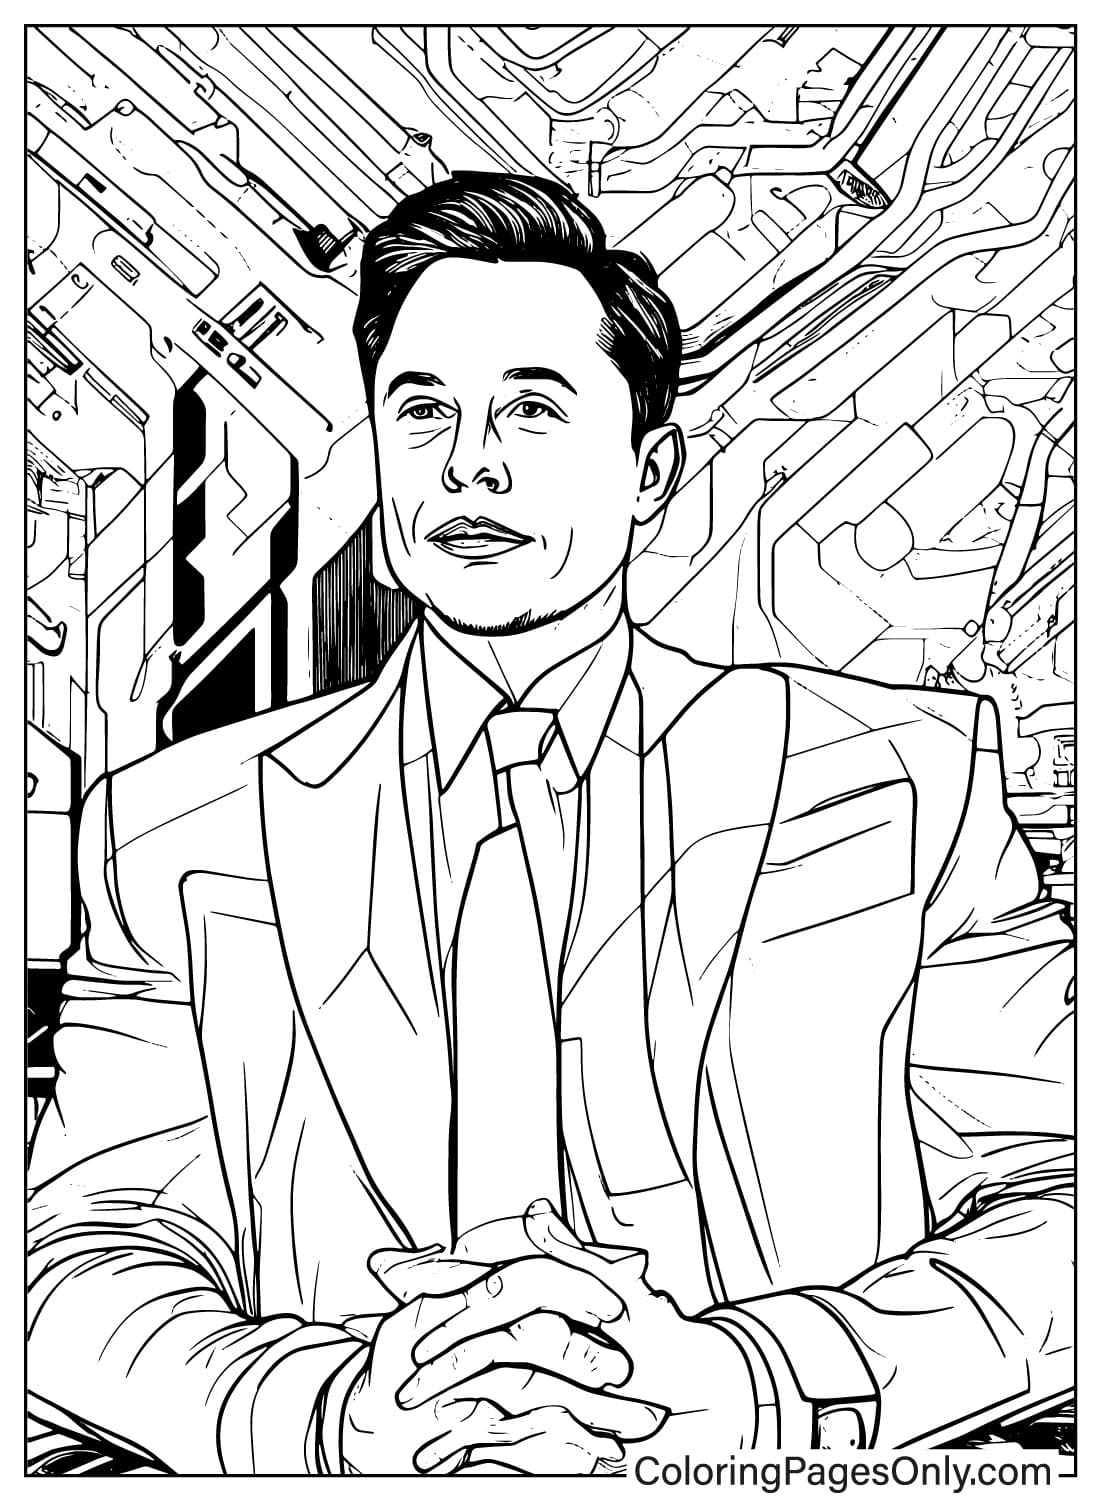 Free Elon Musk Coloring Page